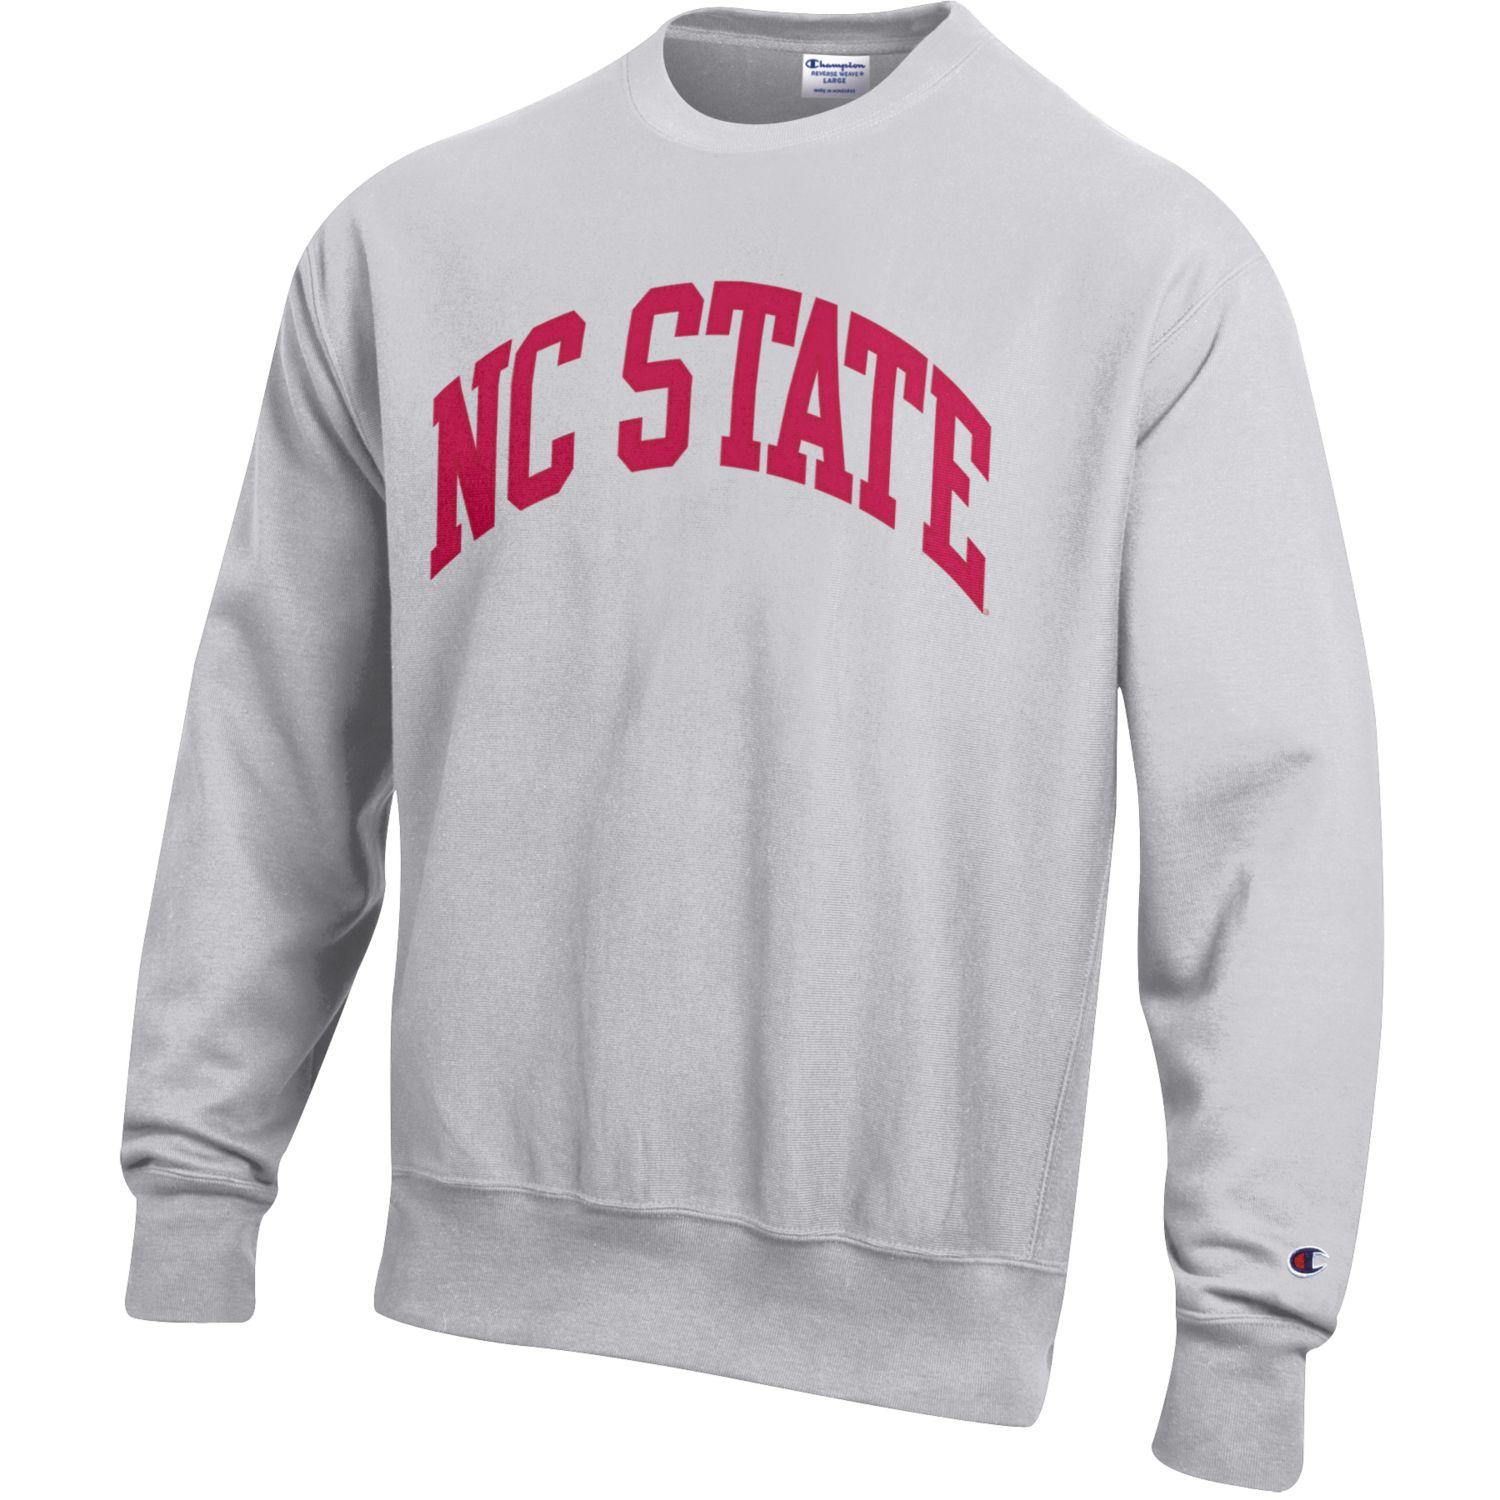 NC State Wolfpack Champion Silver Grey Embroidered Red NC State Reverse Weave Crewneck Sweatshirt